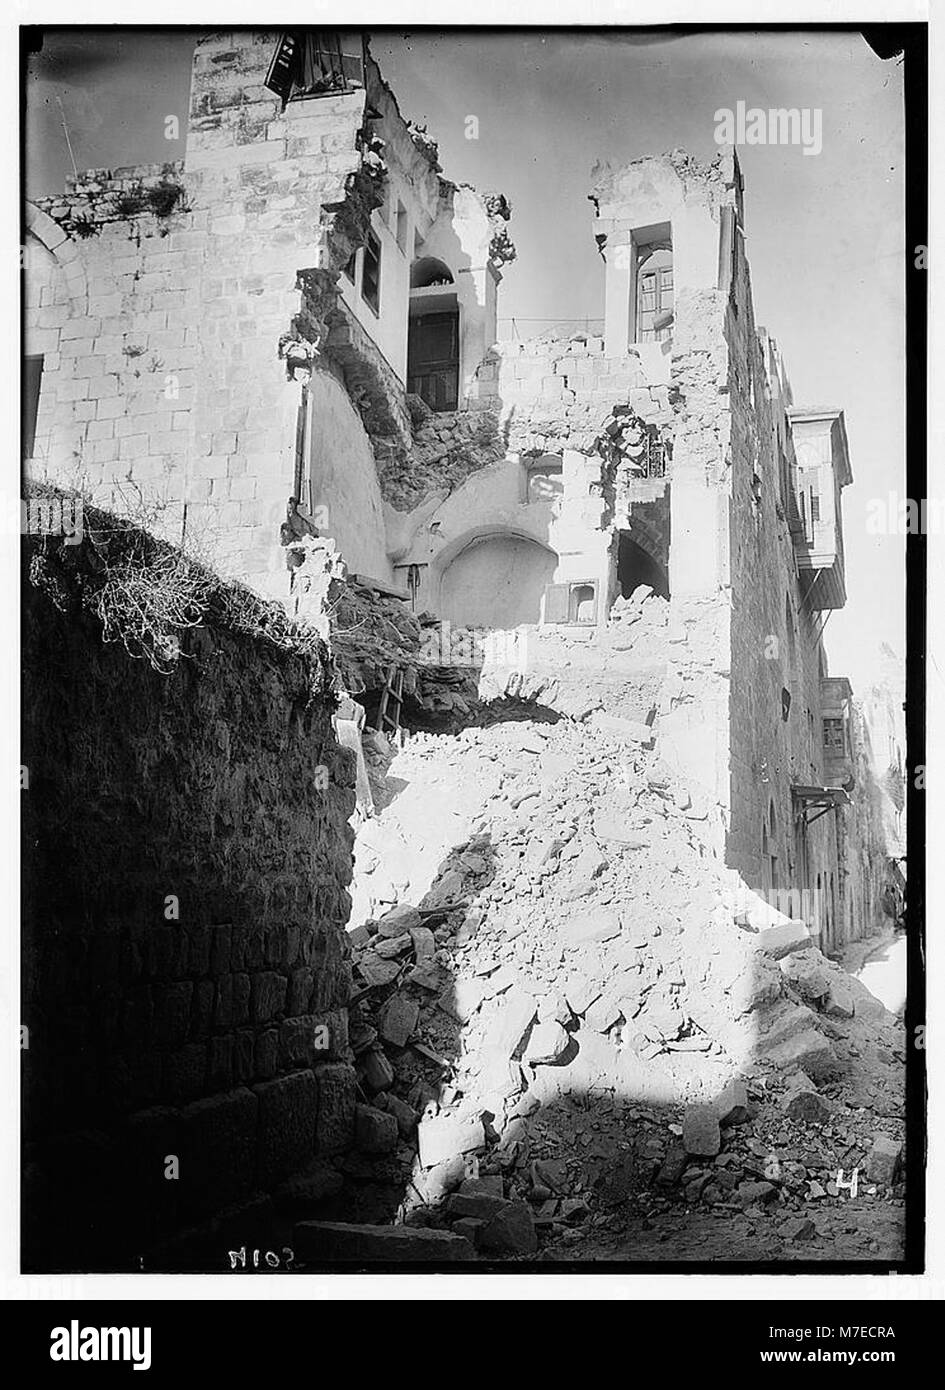 Palestine events. The earthquake of July 11, 1927. A house in Nablus reduced to a mere shell by the earthquake LOC matpc.03041 Stock Photo